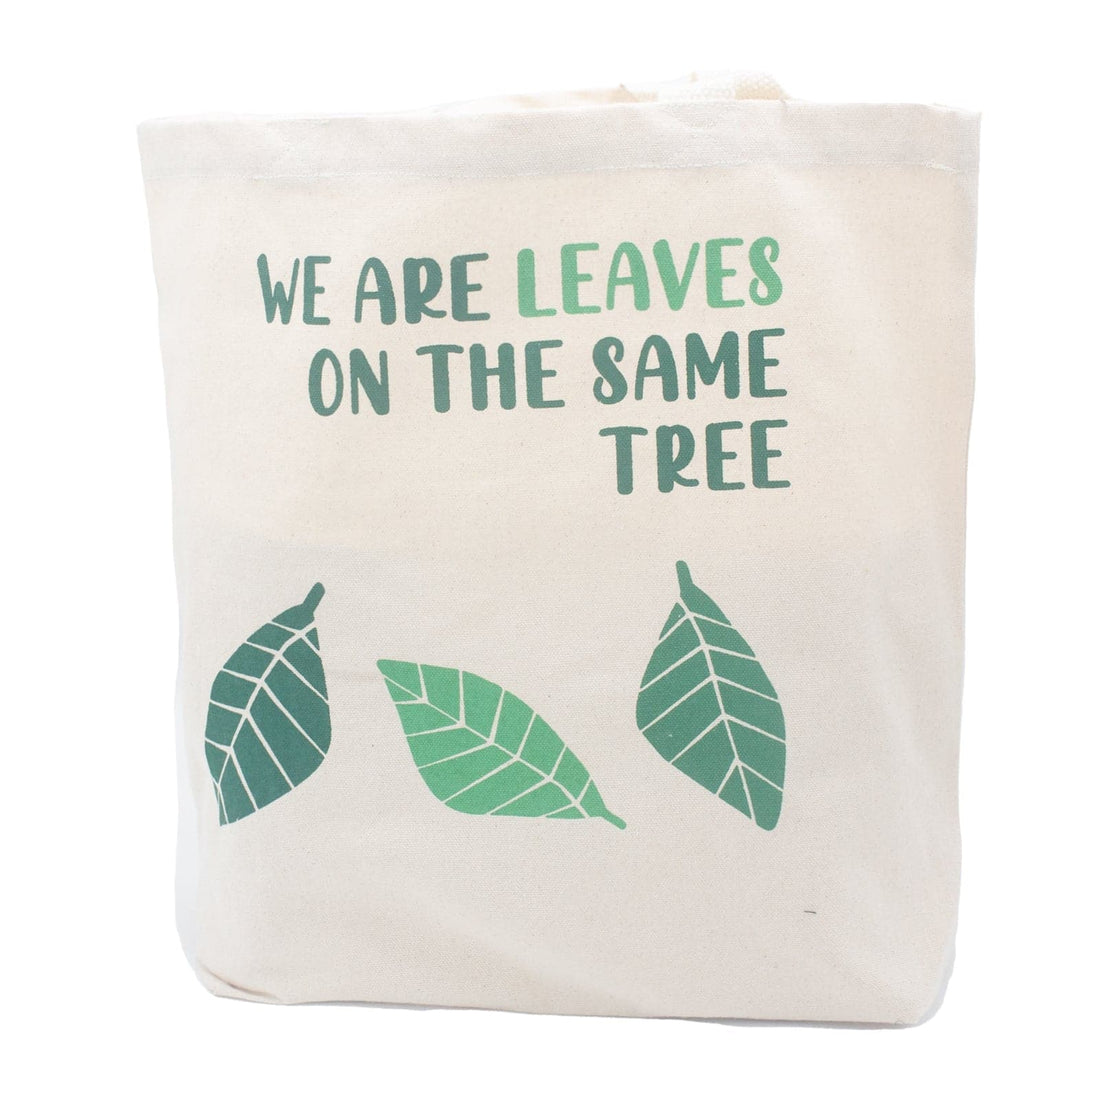 Printed Cotton Bag - We are Leaves - Natural - best price from Maltashopper.com PCB-02C